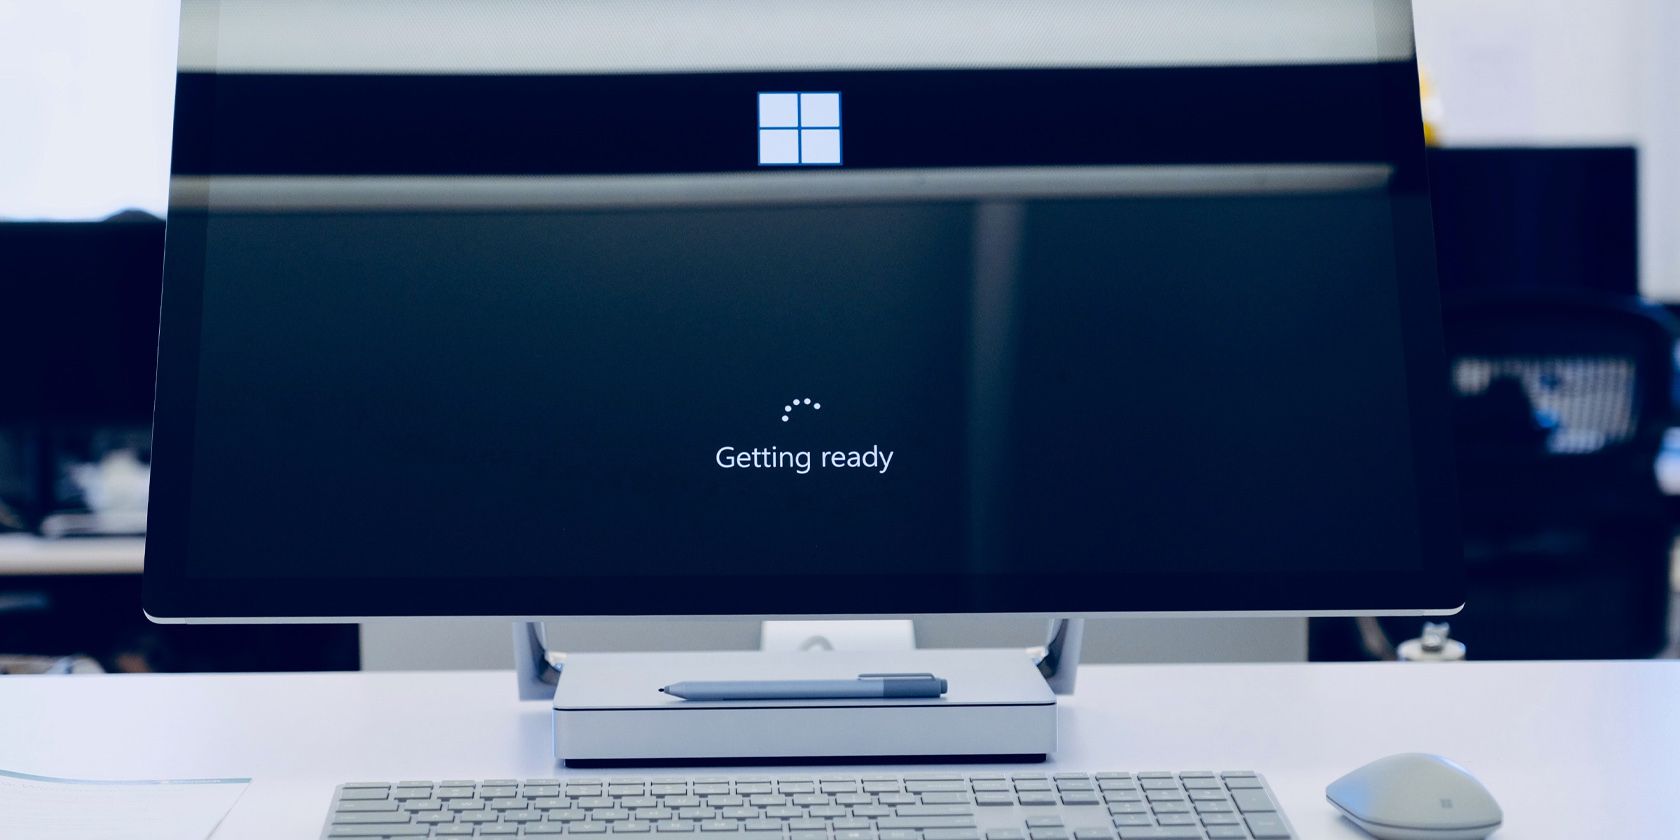 Windows 11 PC Shutting Down For No Reason? Here’s How to Fix It